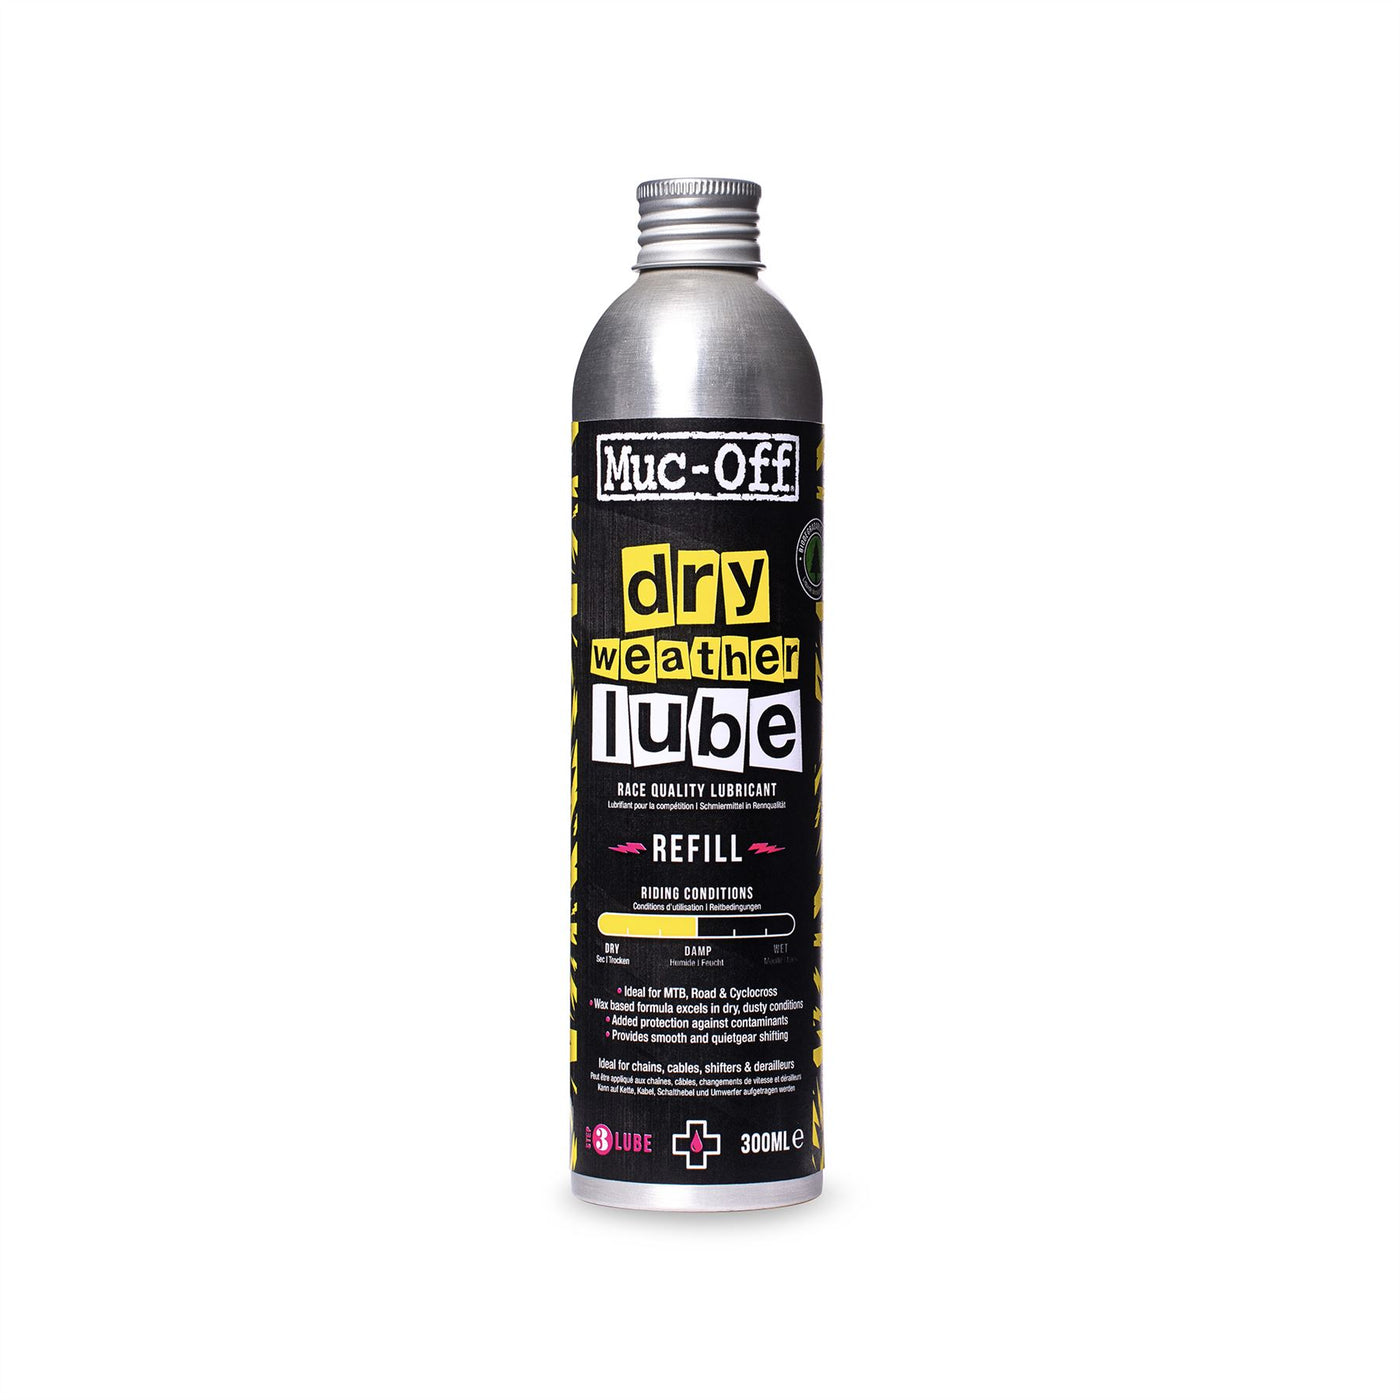 Muc-Off Dry Weather Race Quality Lube - 300ml Refill Bottle